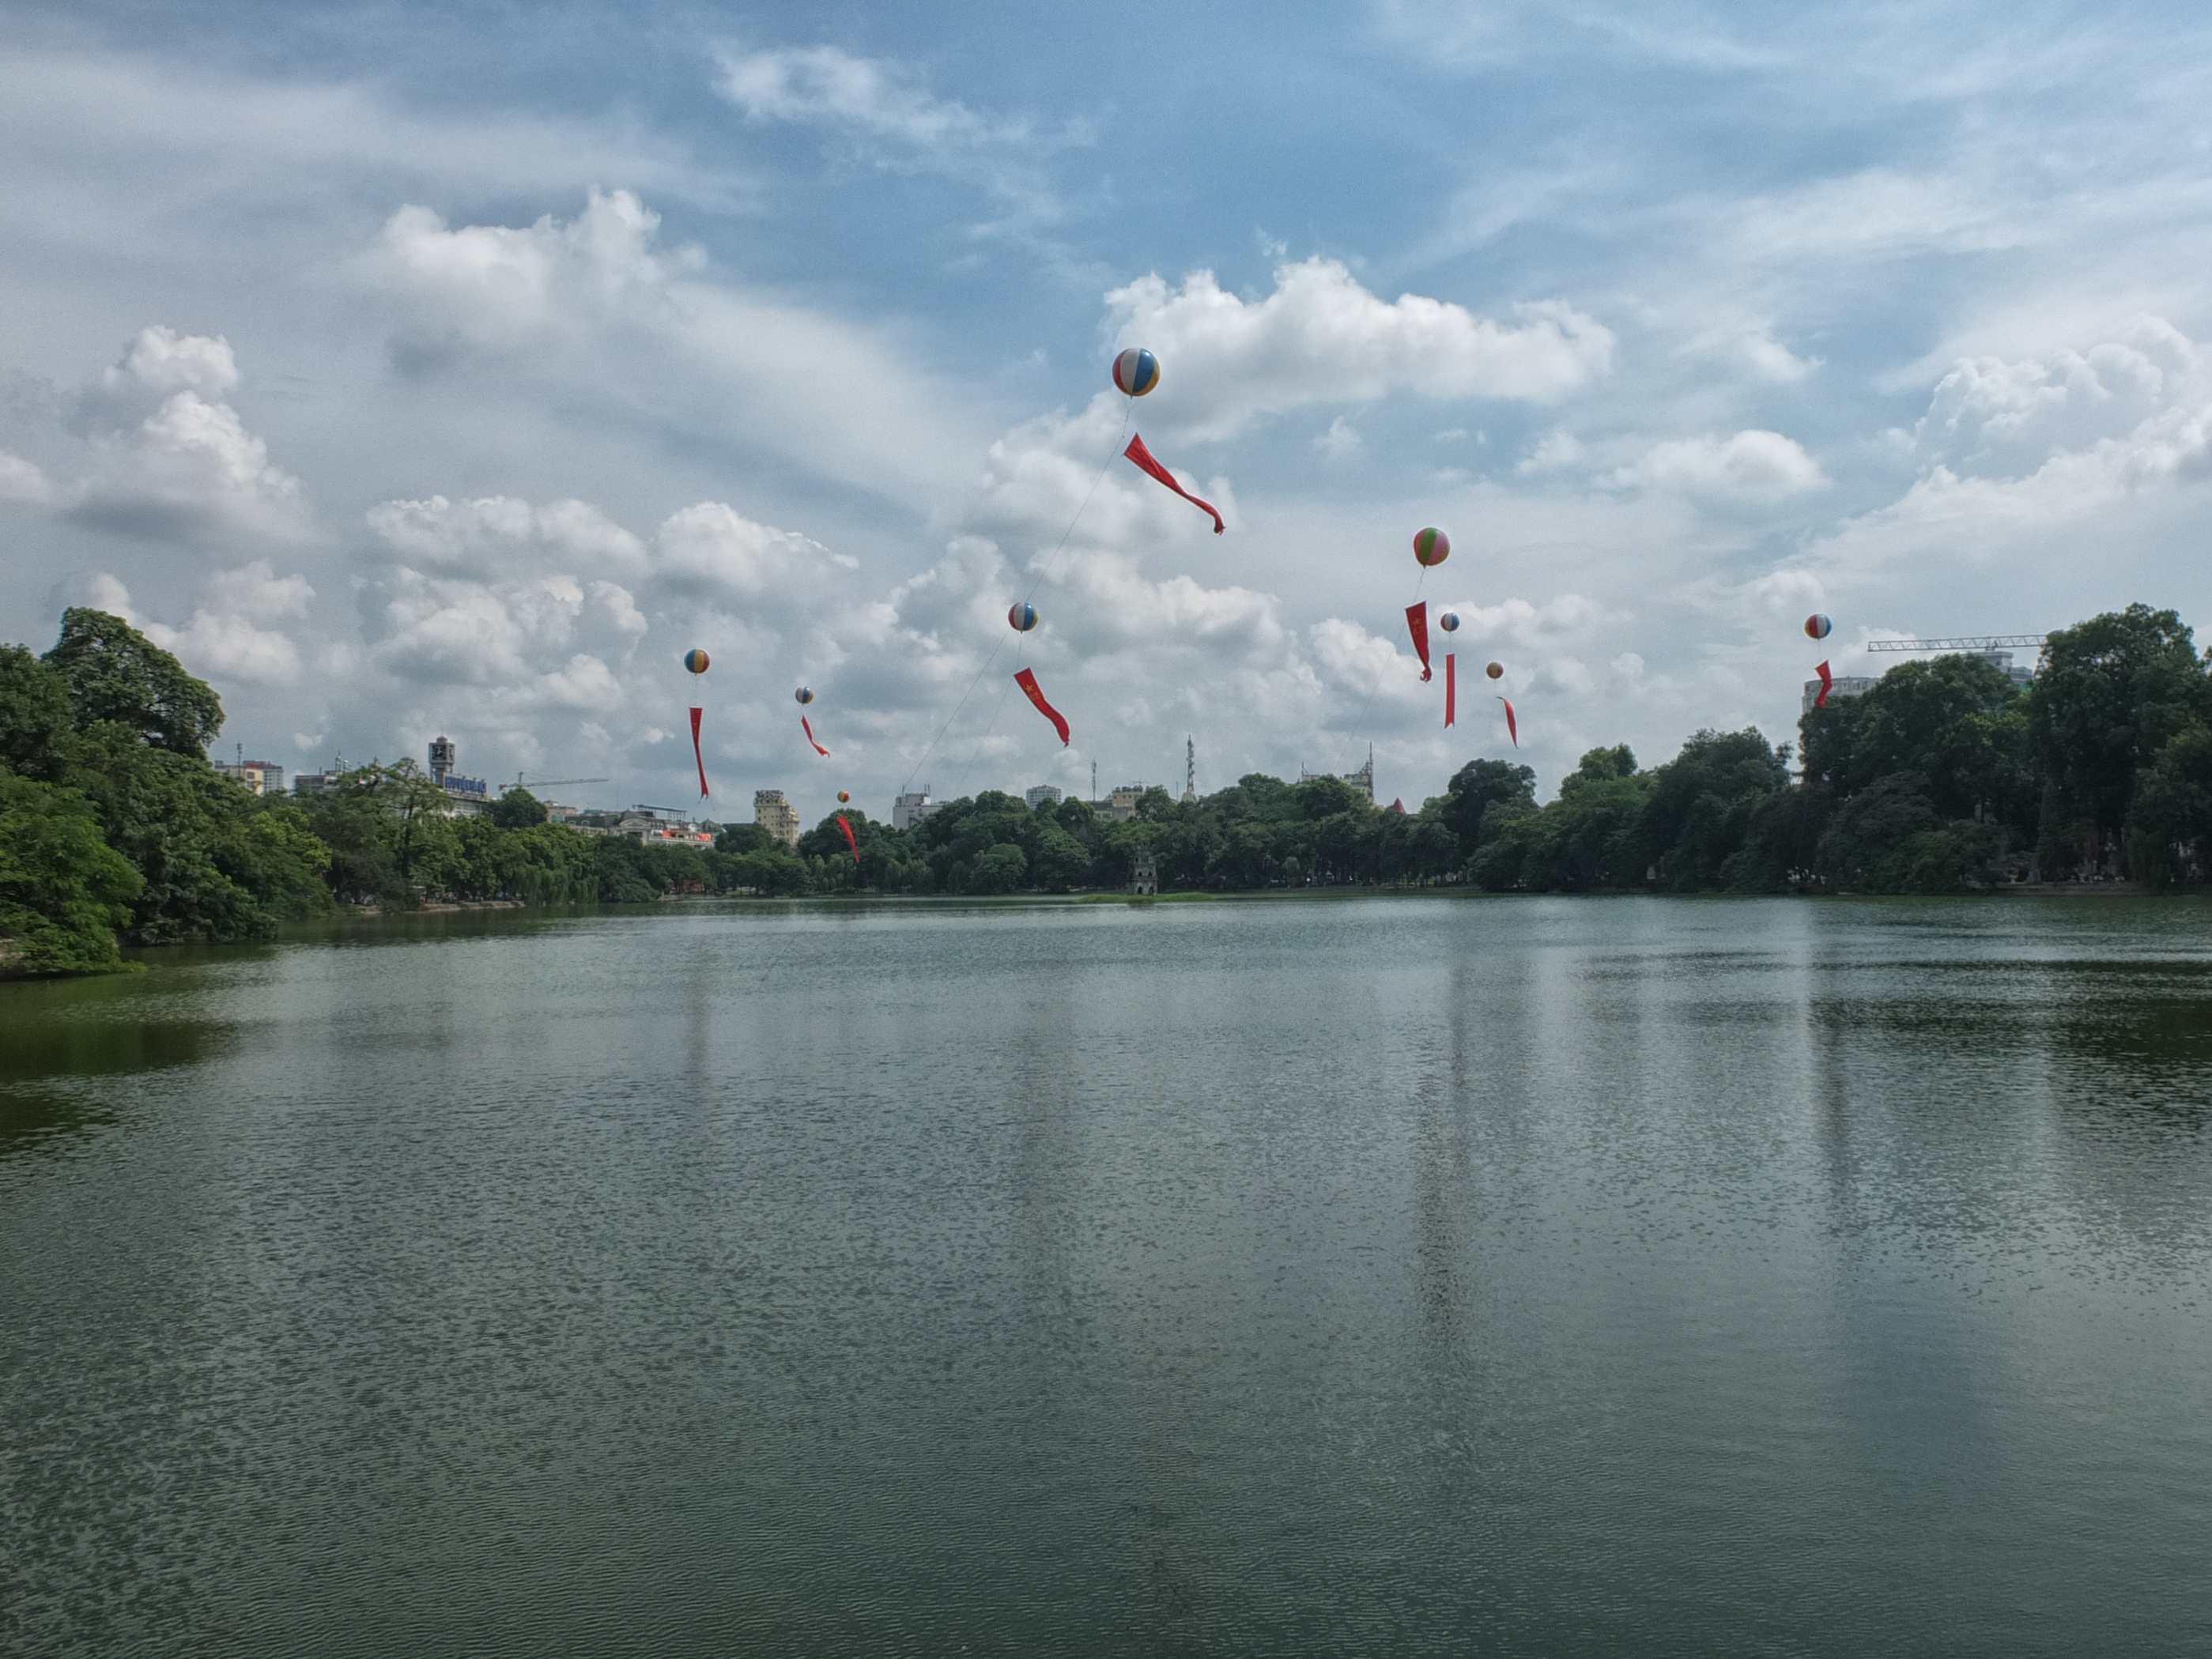 a group of balloons flying over a lake